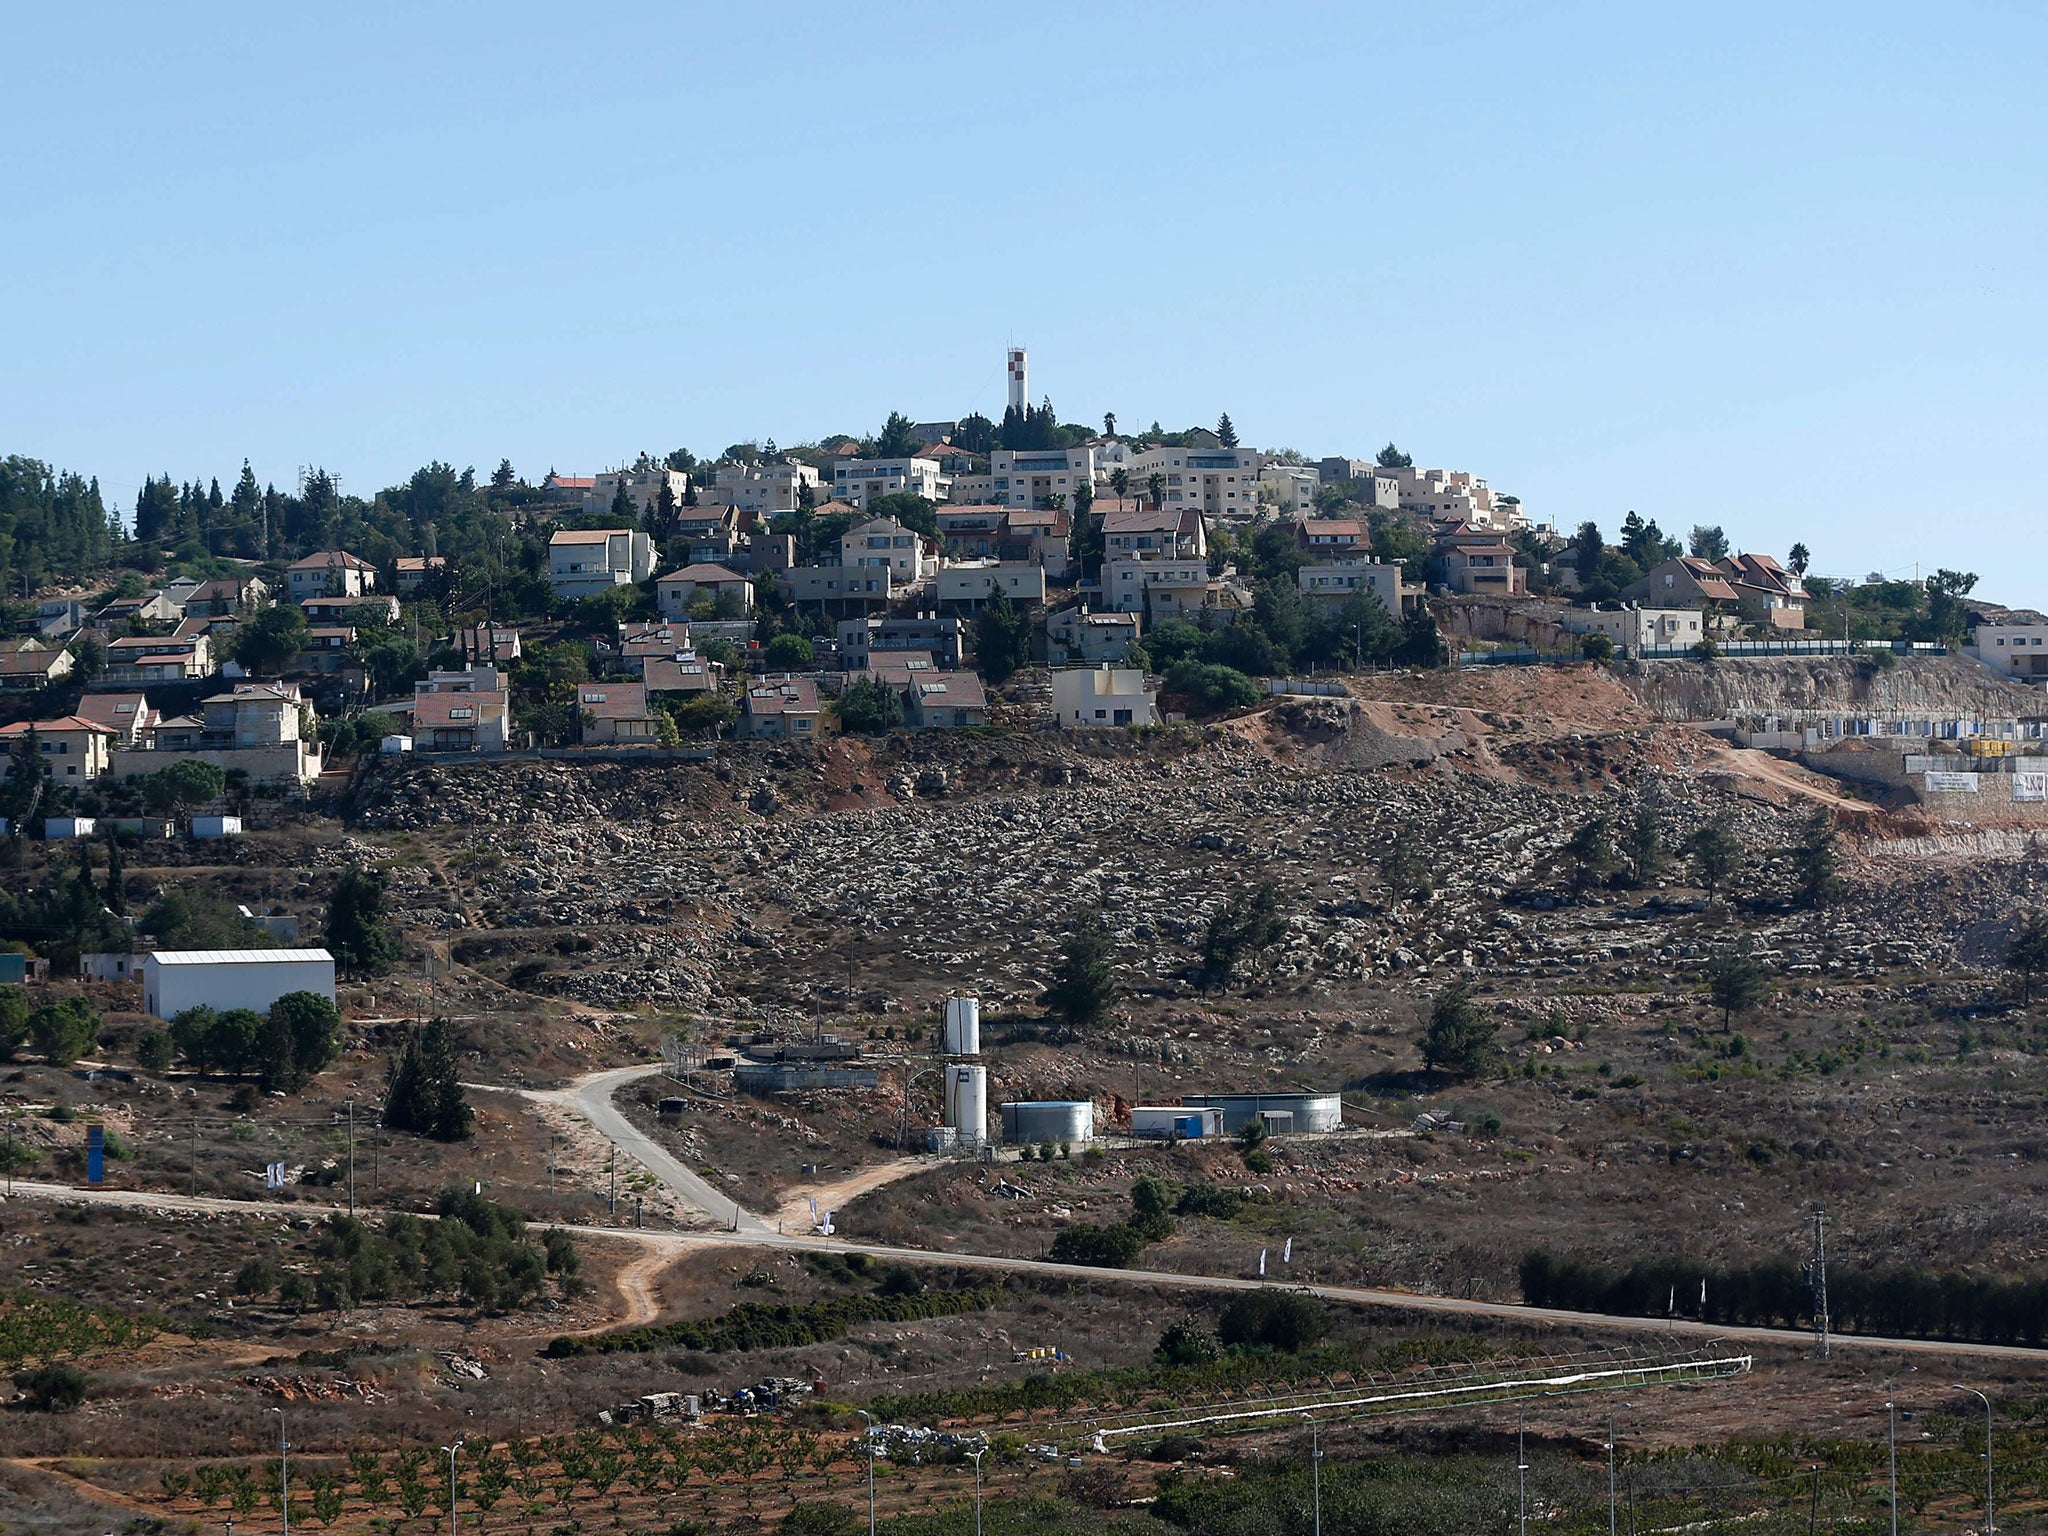 New housing units being built in the Israeli settlement of Shilo in the occupied Palestinian territories on Sunday